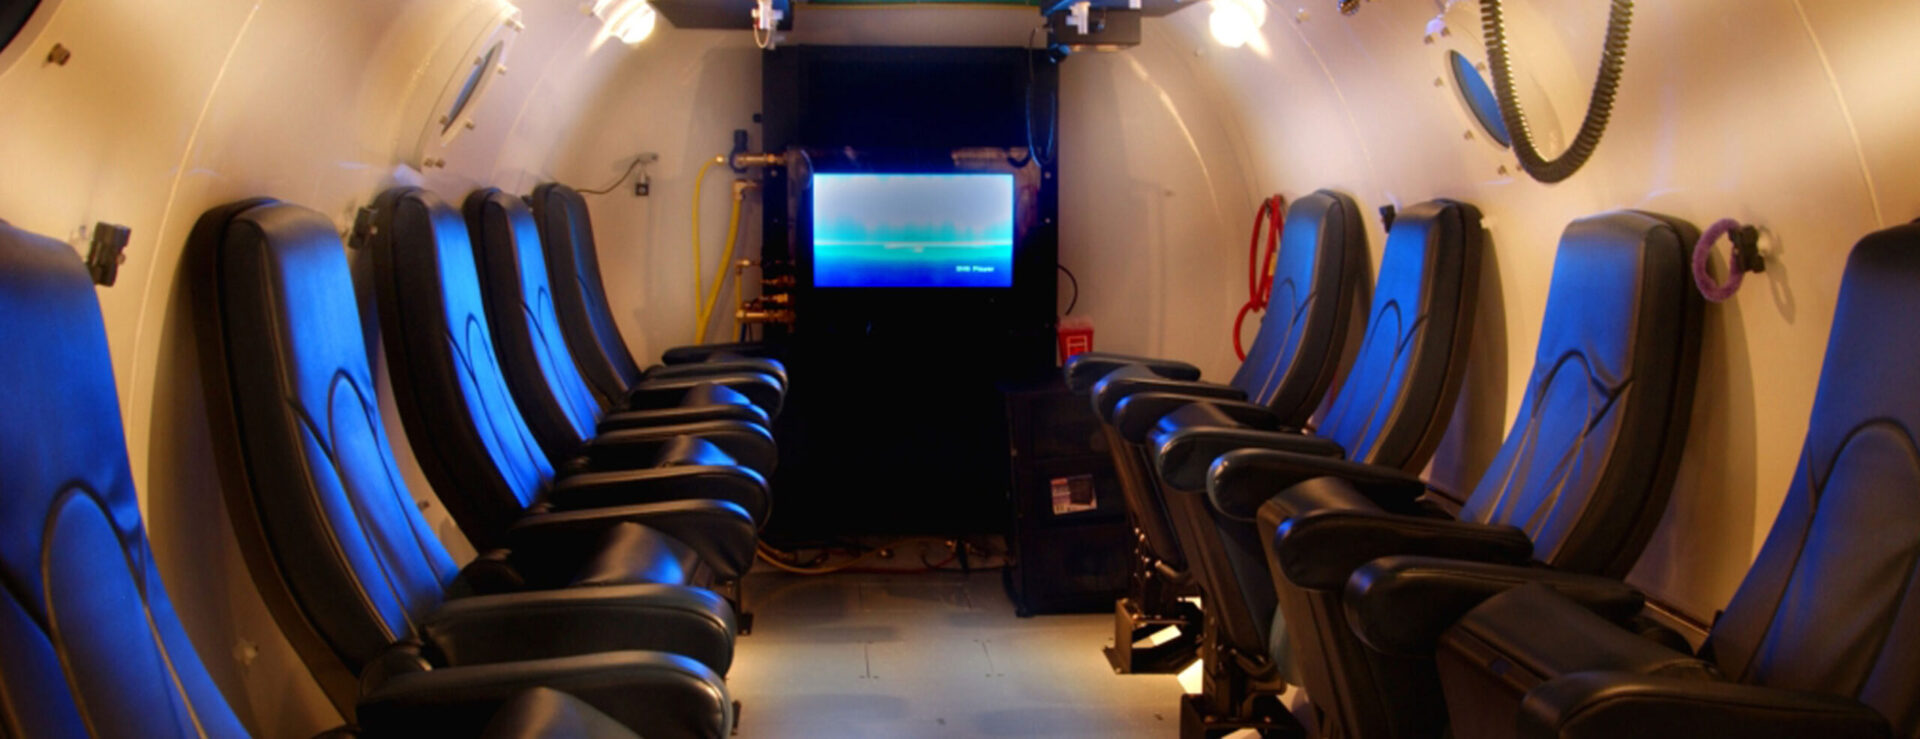 inside of a hyperbaric chamber